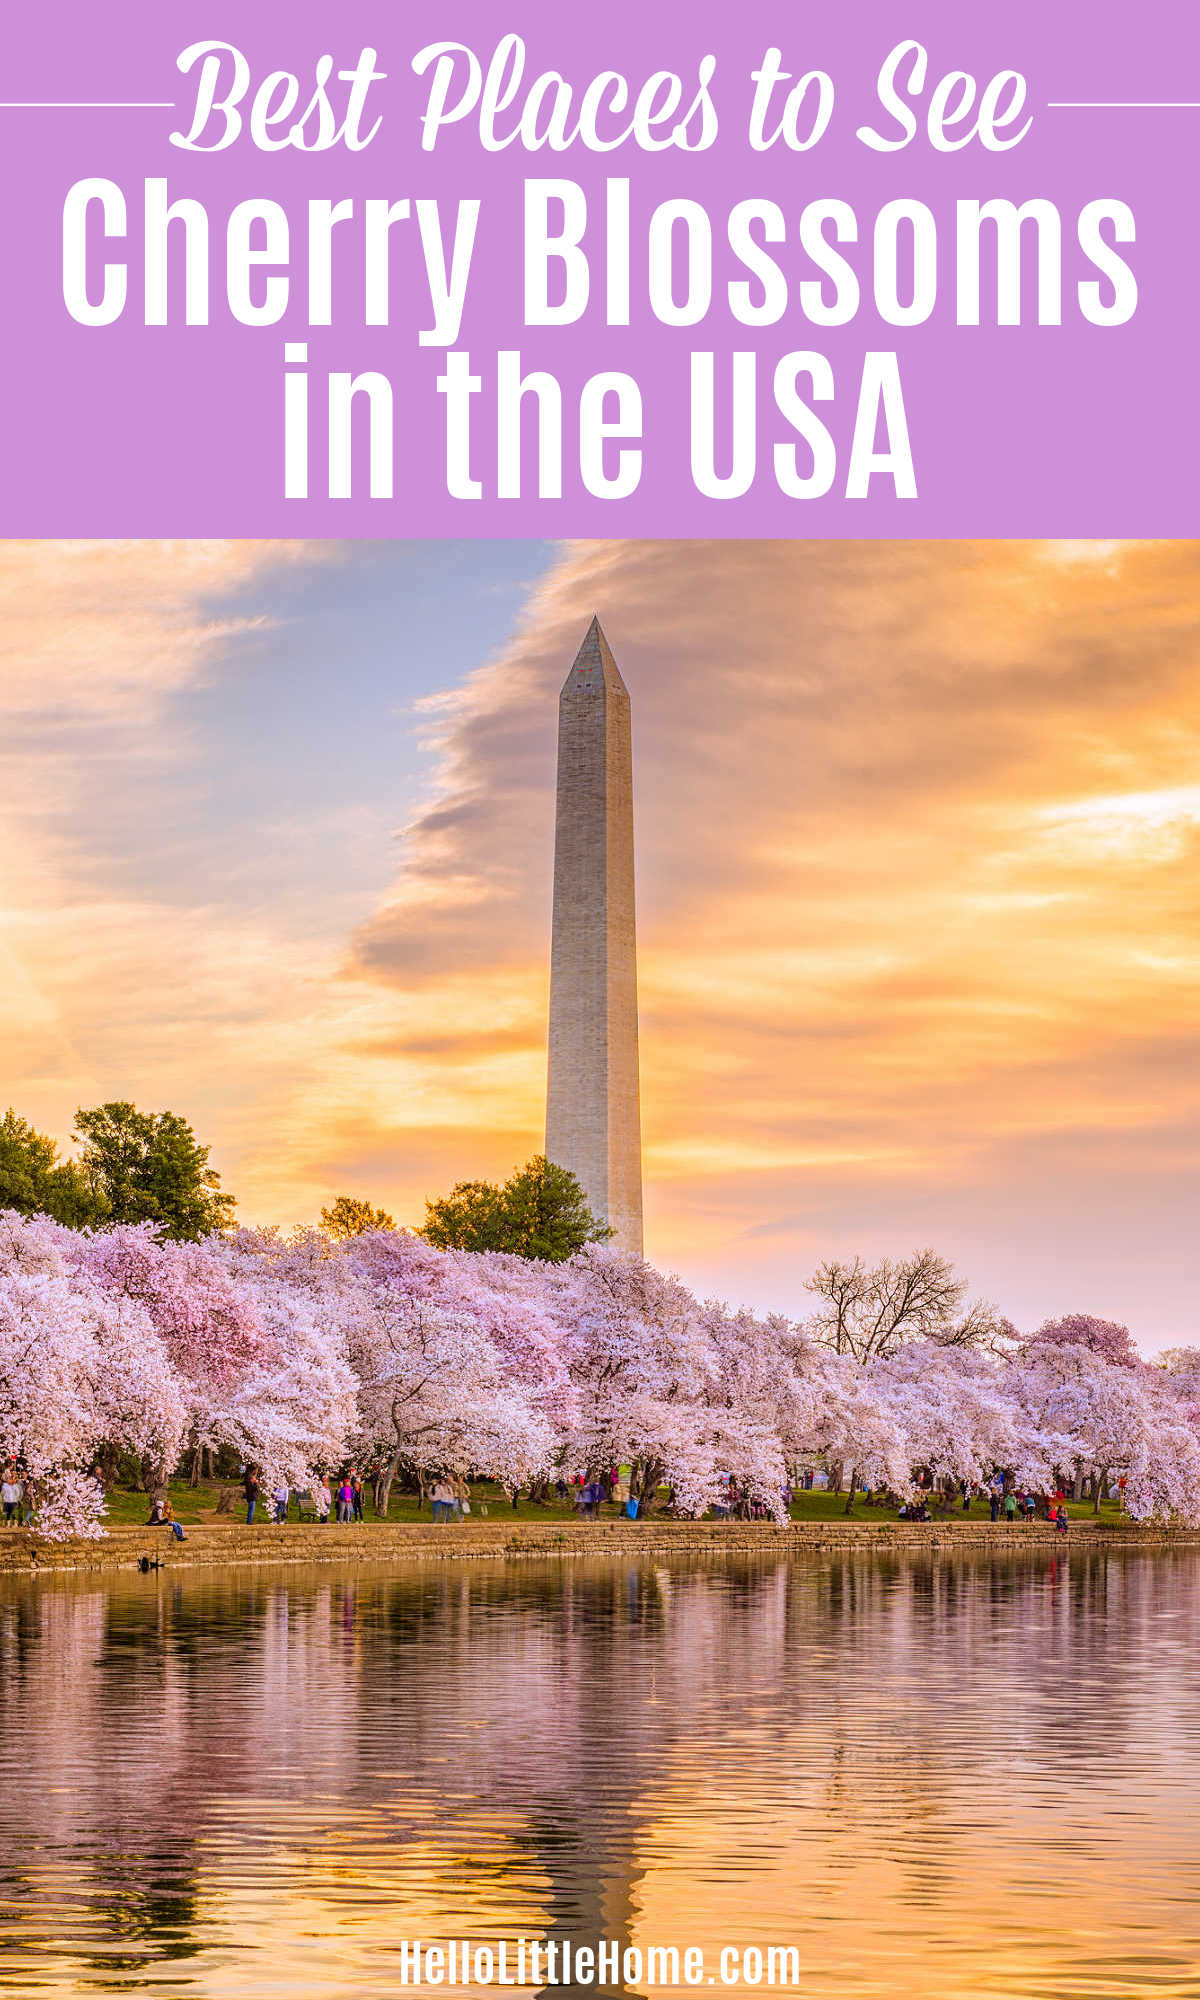 Where to See Cherry Blossoms in the U.S.